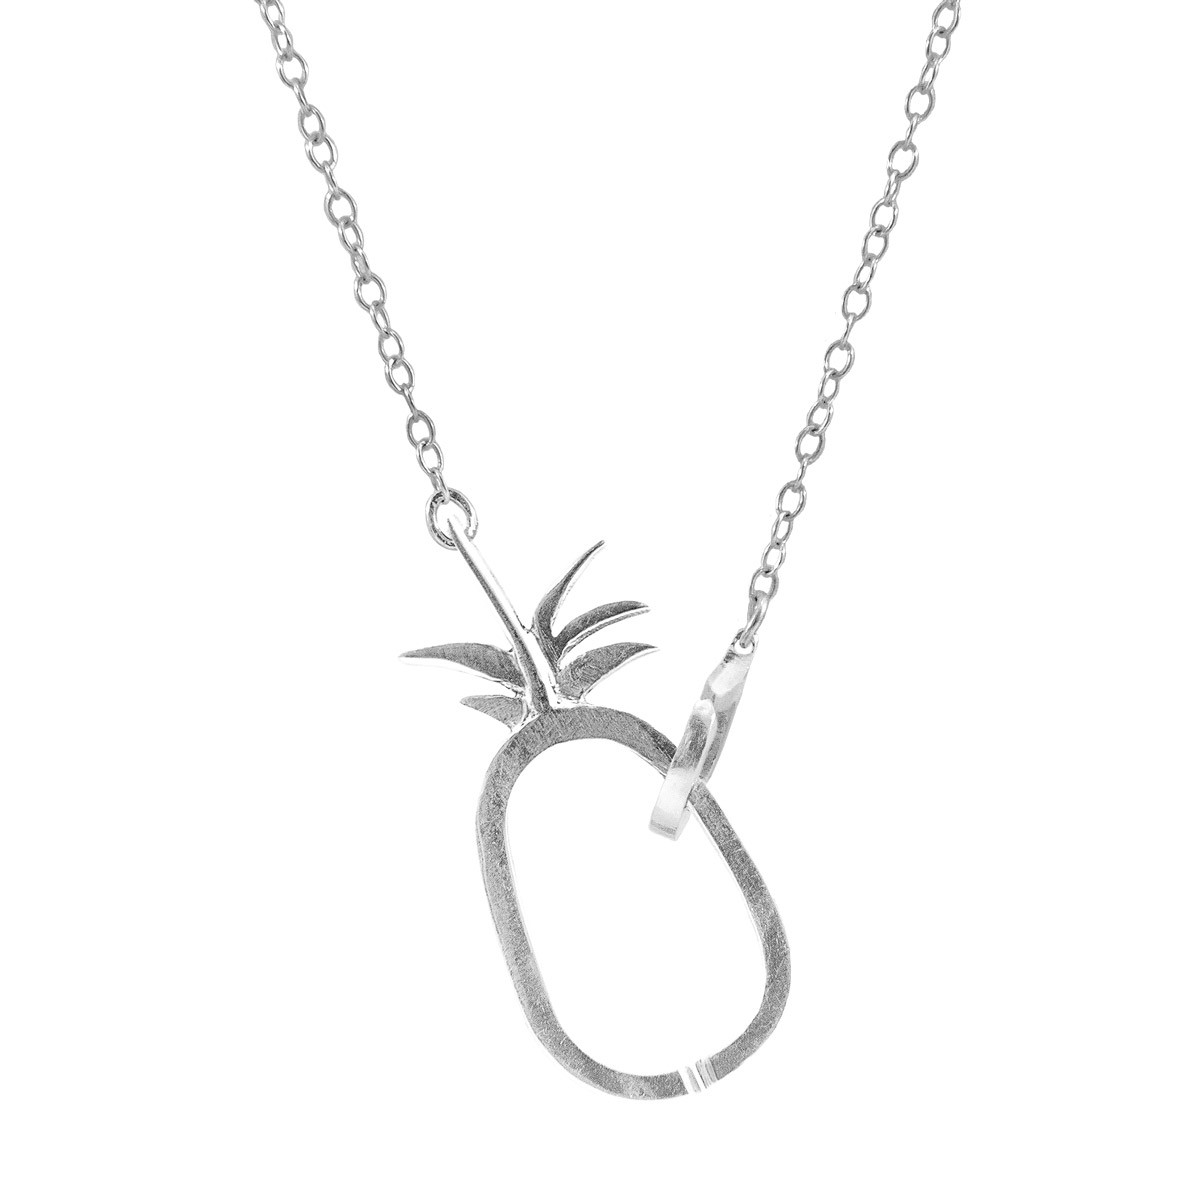 Tropical Pineapple Link Paradise Silver Necklace Pendant